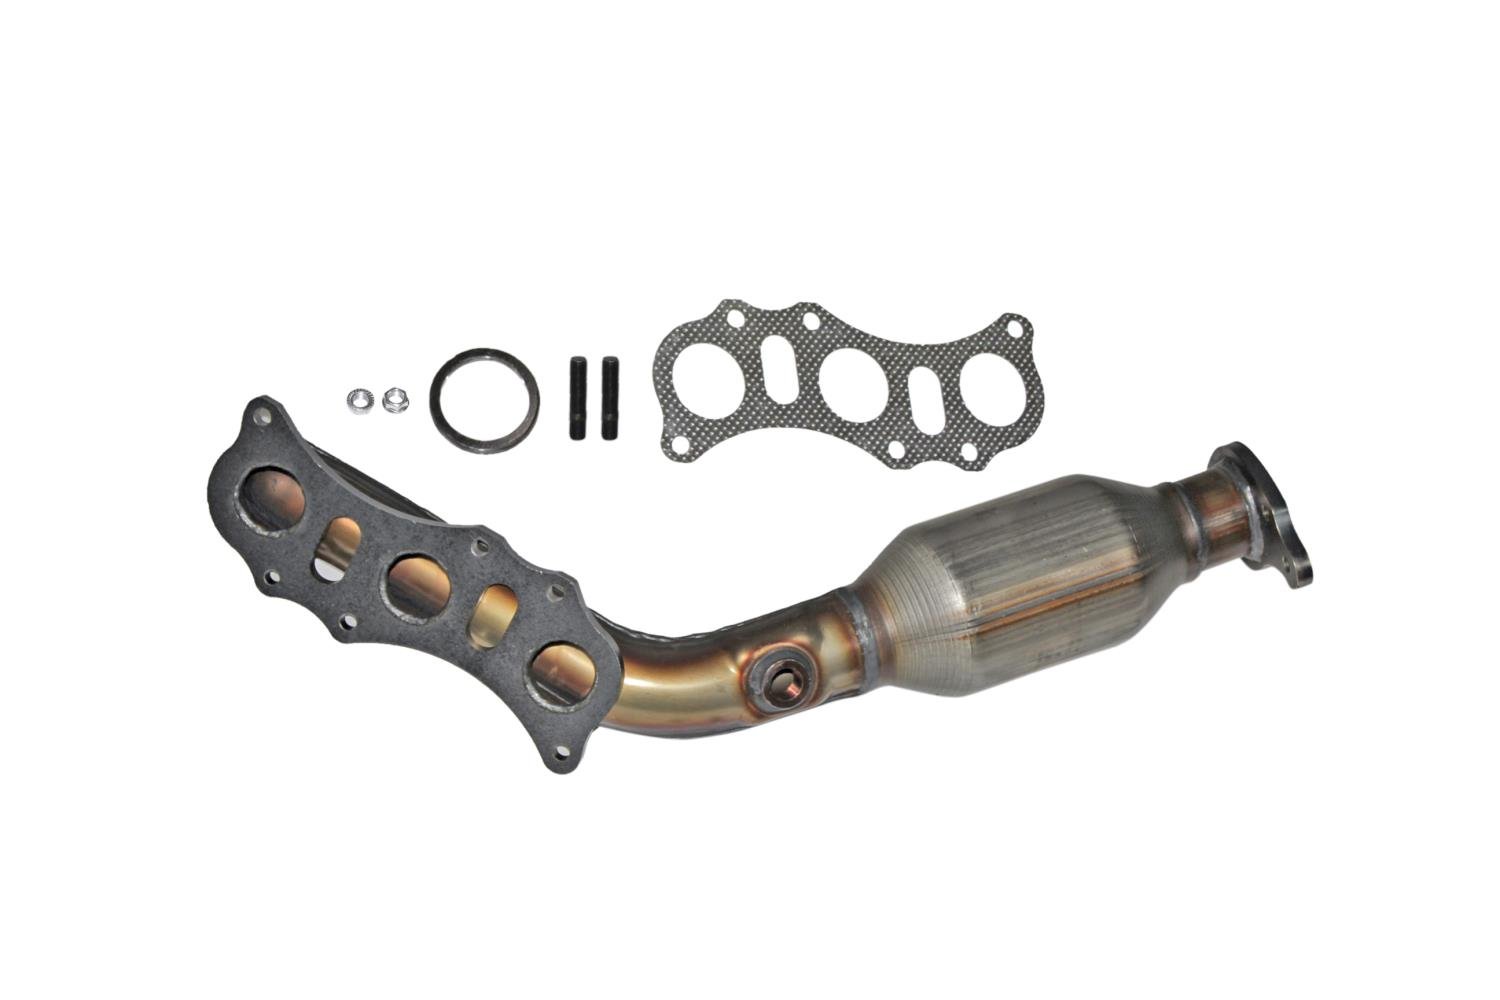 Catalytic Converter Fits Select 2003-2011 Toyota 4Runner, FJ Cruiser, Tacoma, Tundra Models w/4.0L V6 [Front Right/Pass. Side]